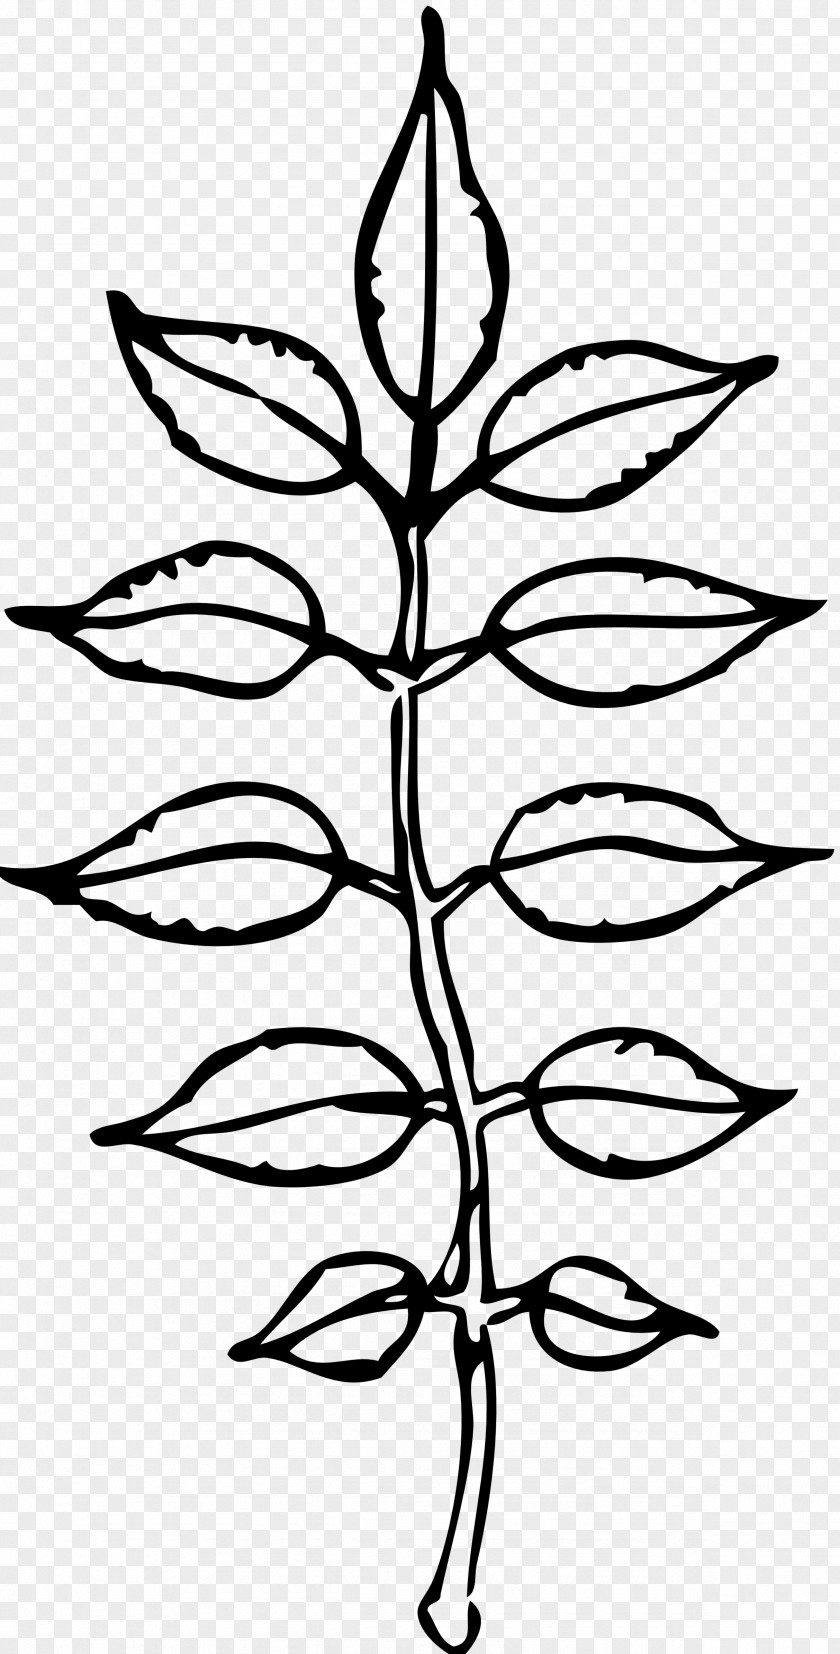 Leaf Black And White Clip Art PNG